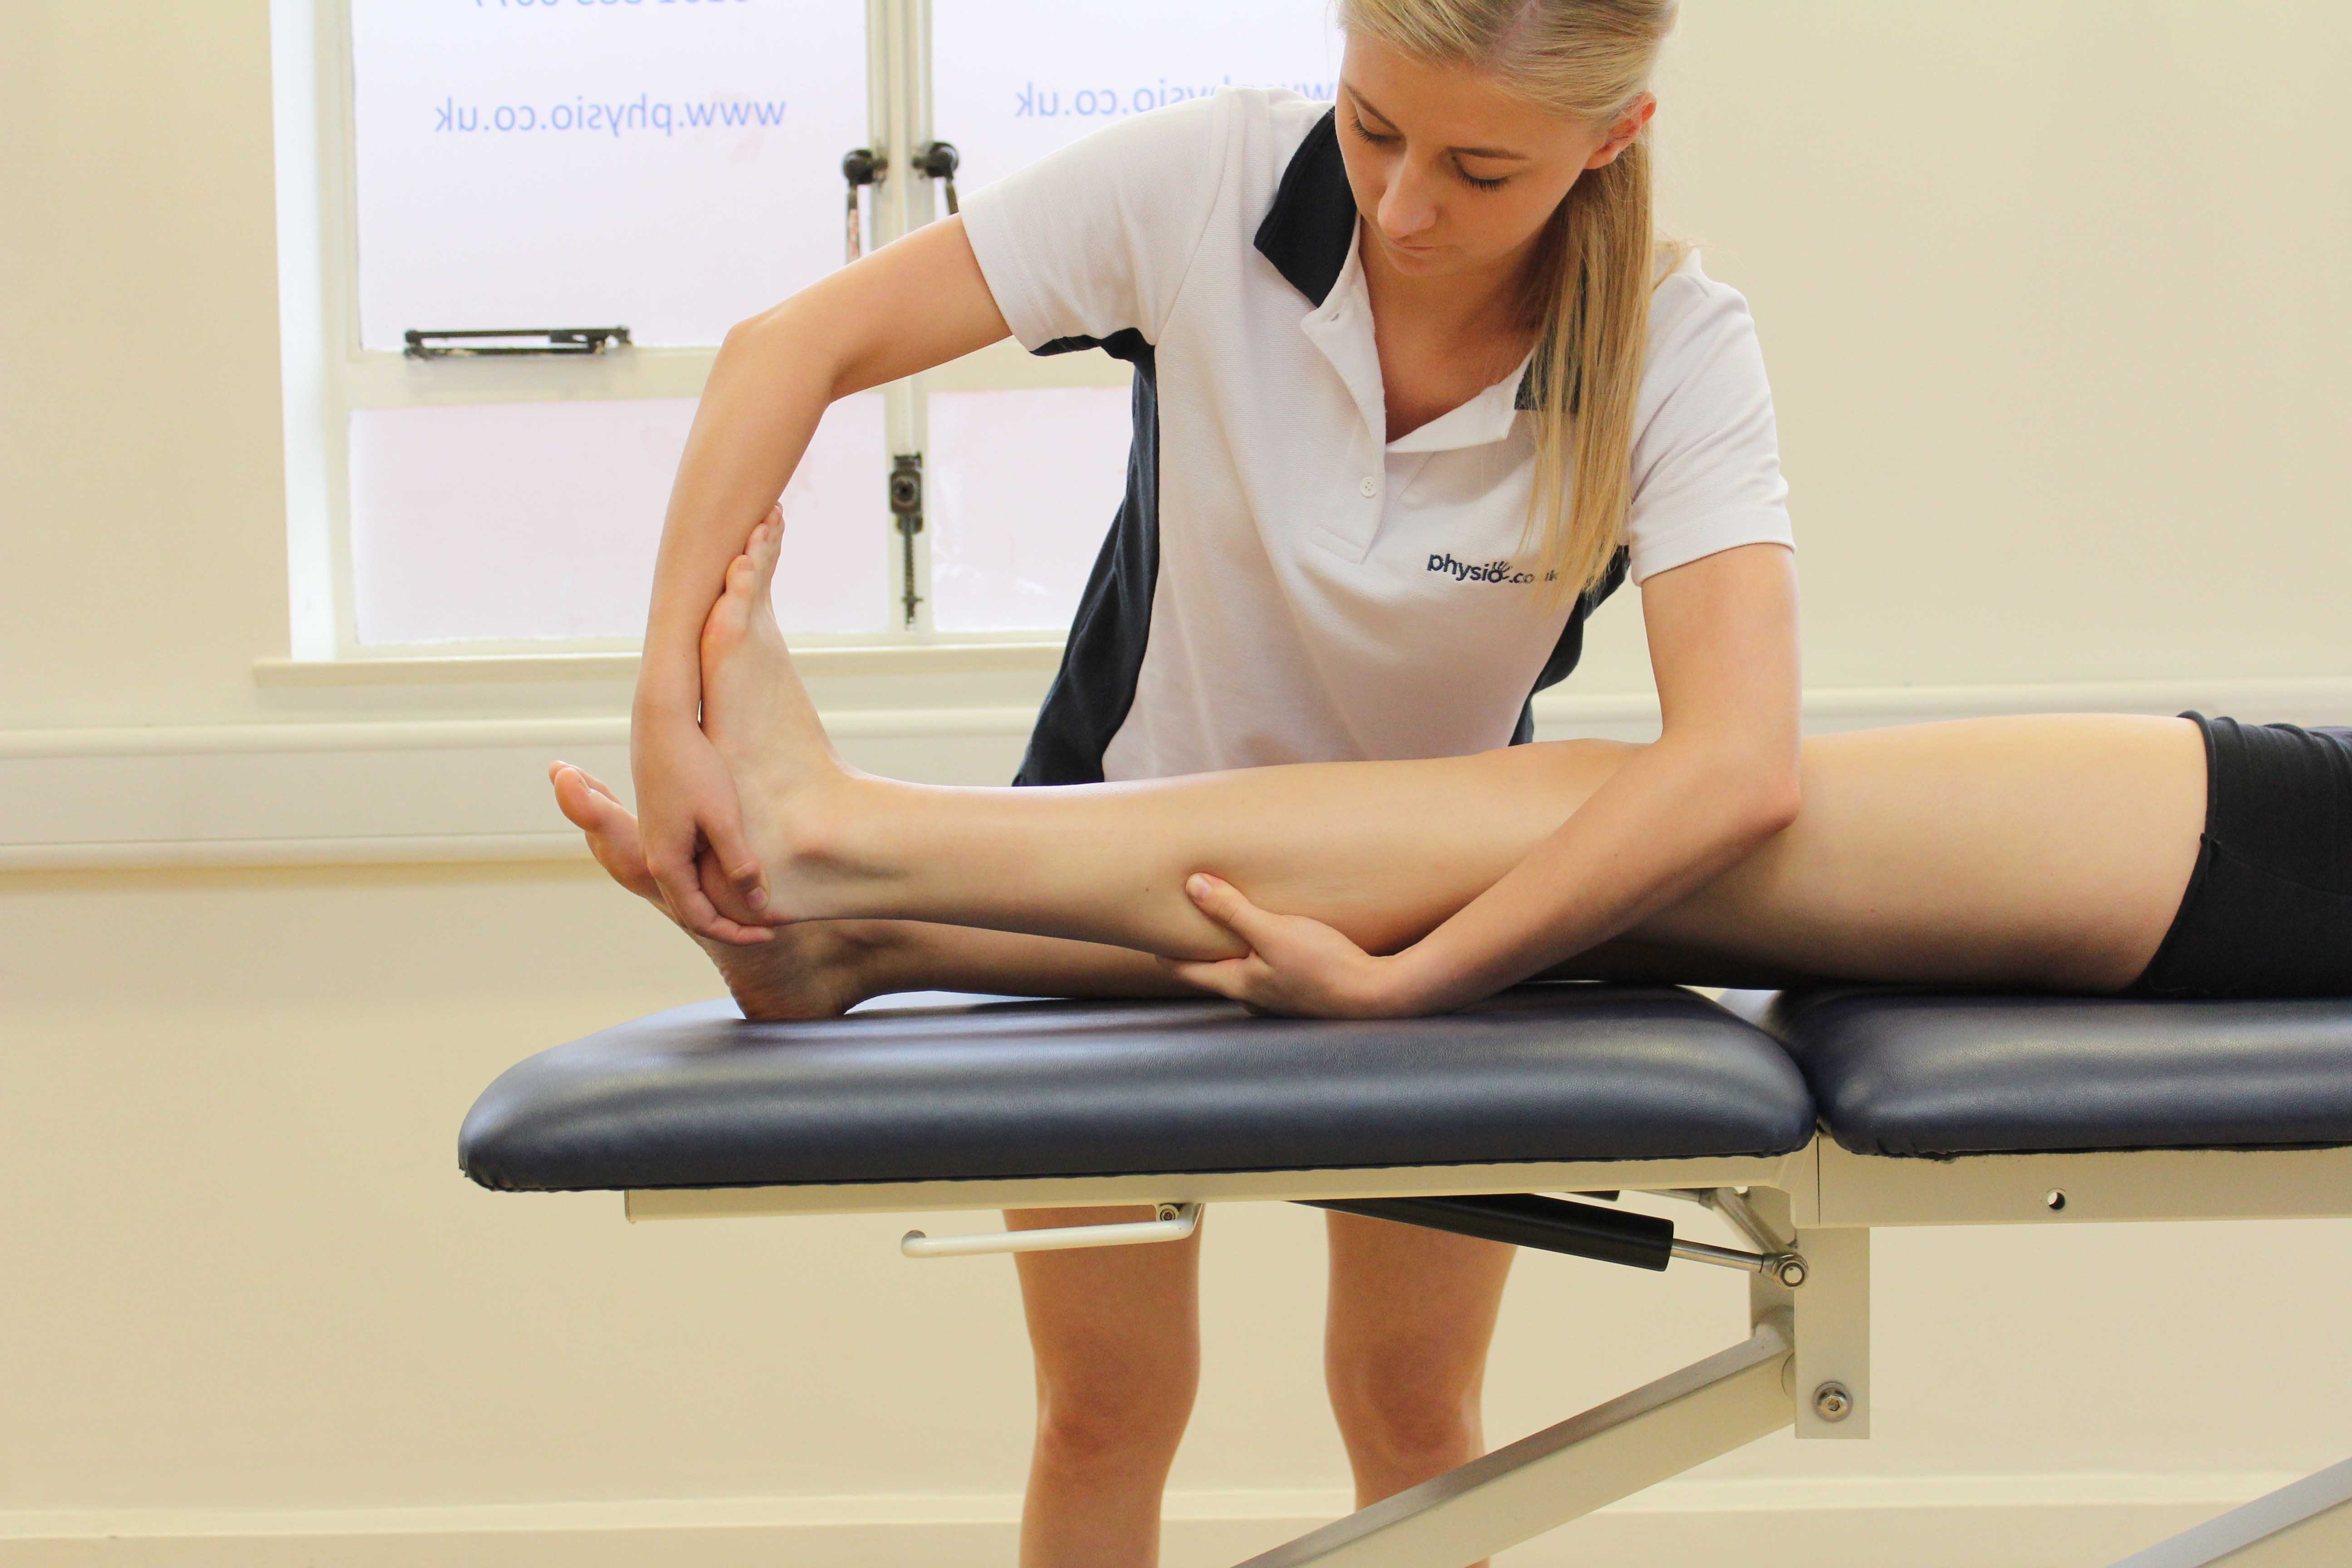 Assessment of the foot and ankle by specialist therapist